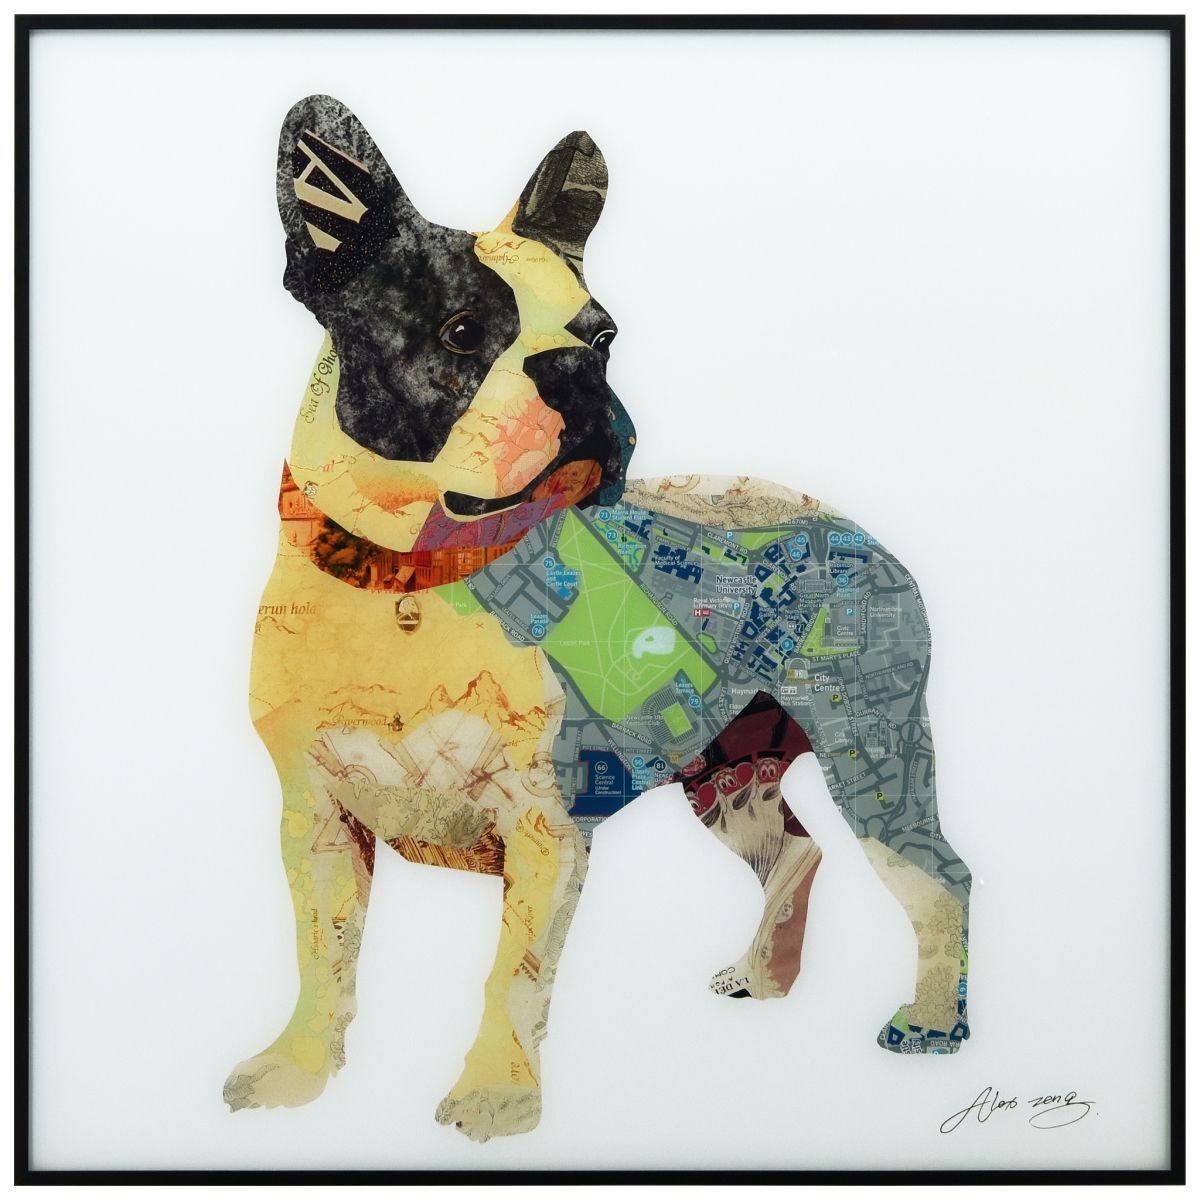 Aagb-az049-2424 24 X 24 In. Boston Terrier Reverse Printed Glass Wall Art With Black Anodized Aluminum Frame